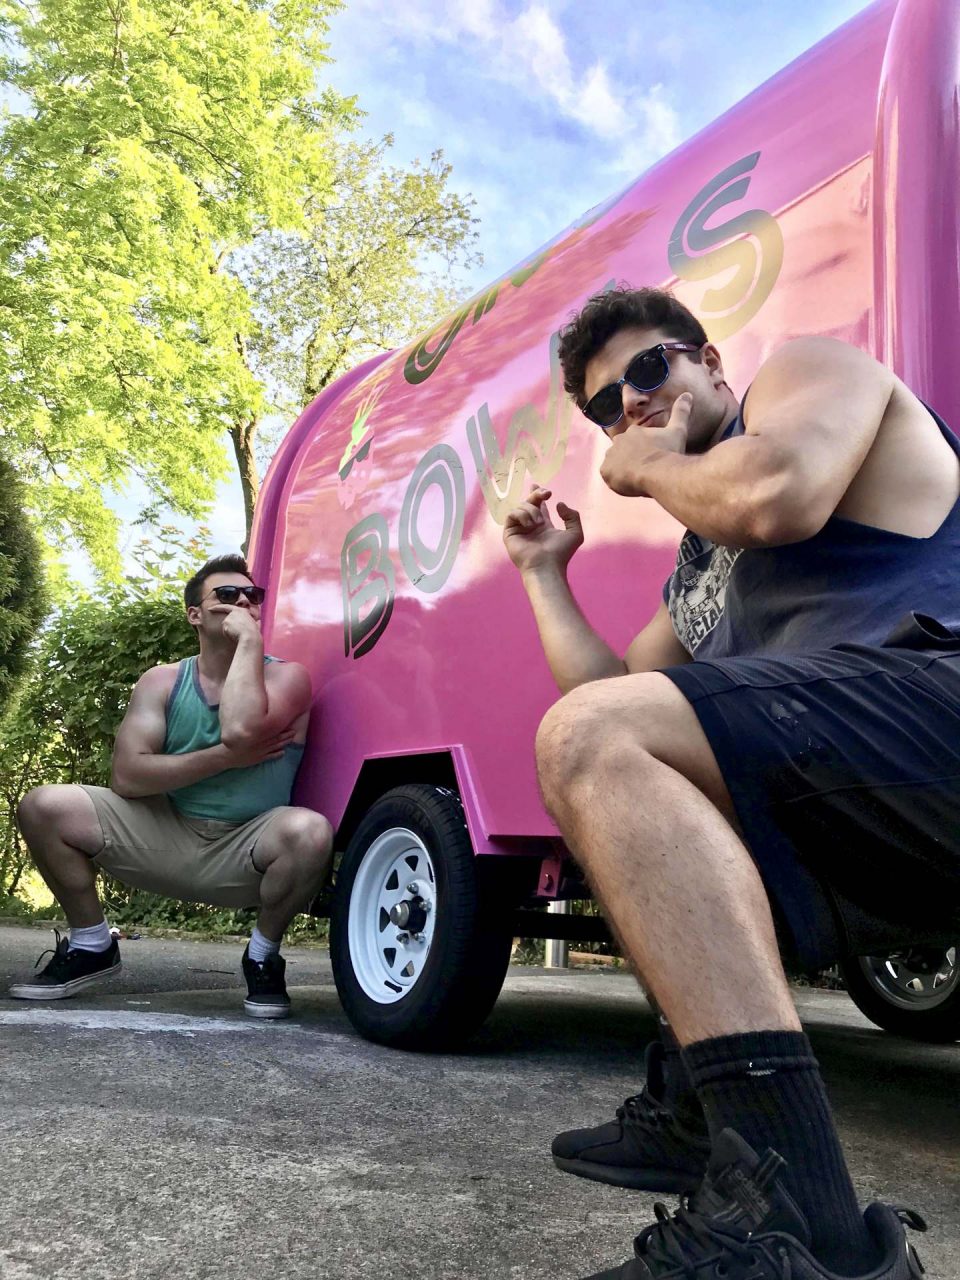 Ono Bowls Food Truck, Two Guys and their Pink Ono Bowls DTS Truck&#8230;.